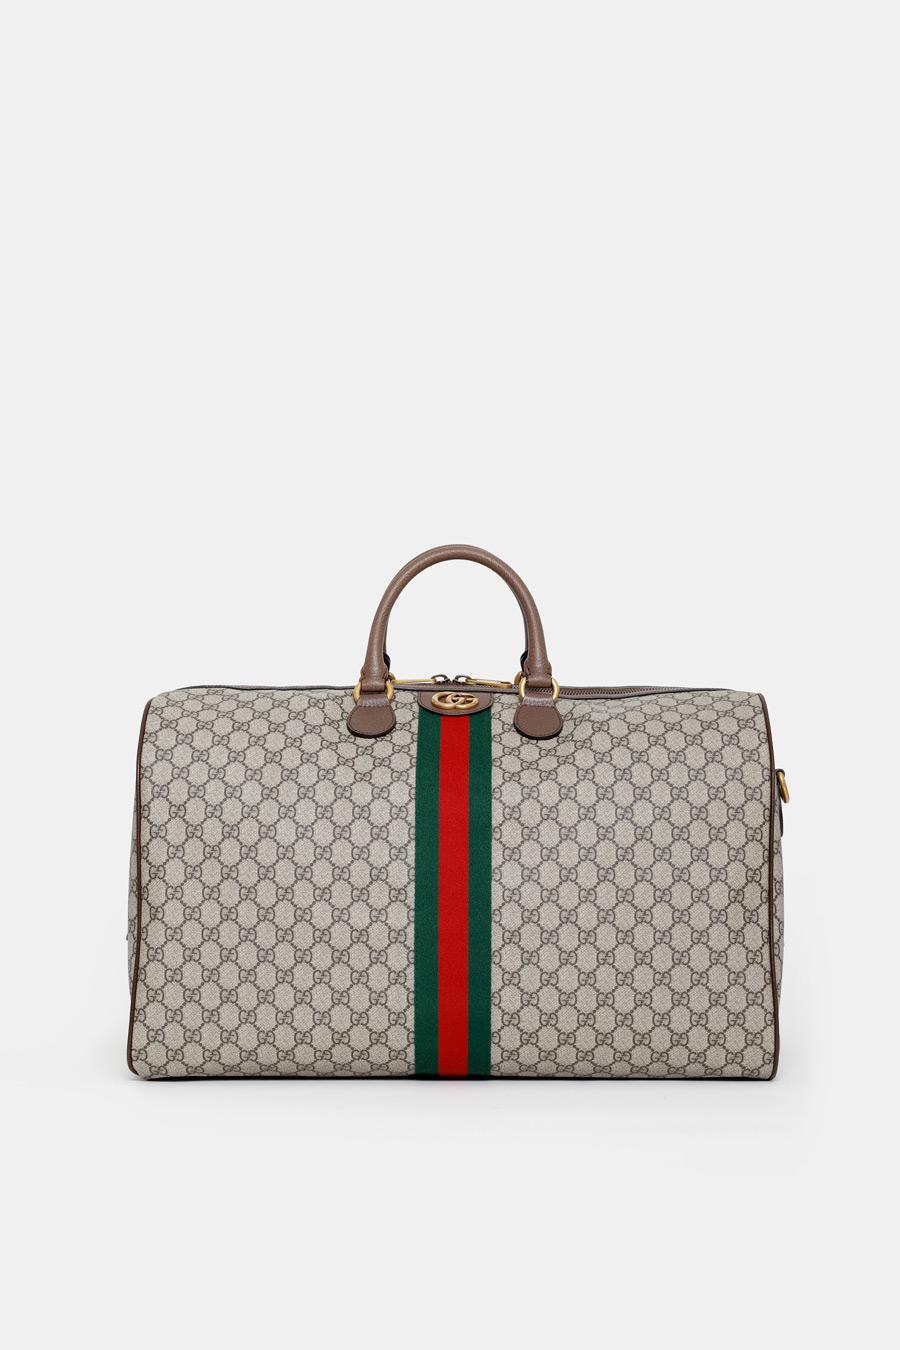 Gucci Ophidia Men&#39;s Duffle Bag in Brown - Lyst